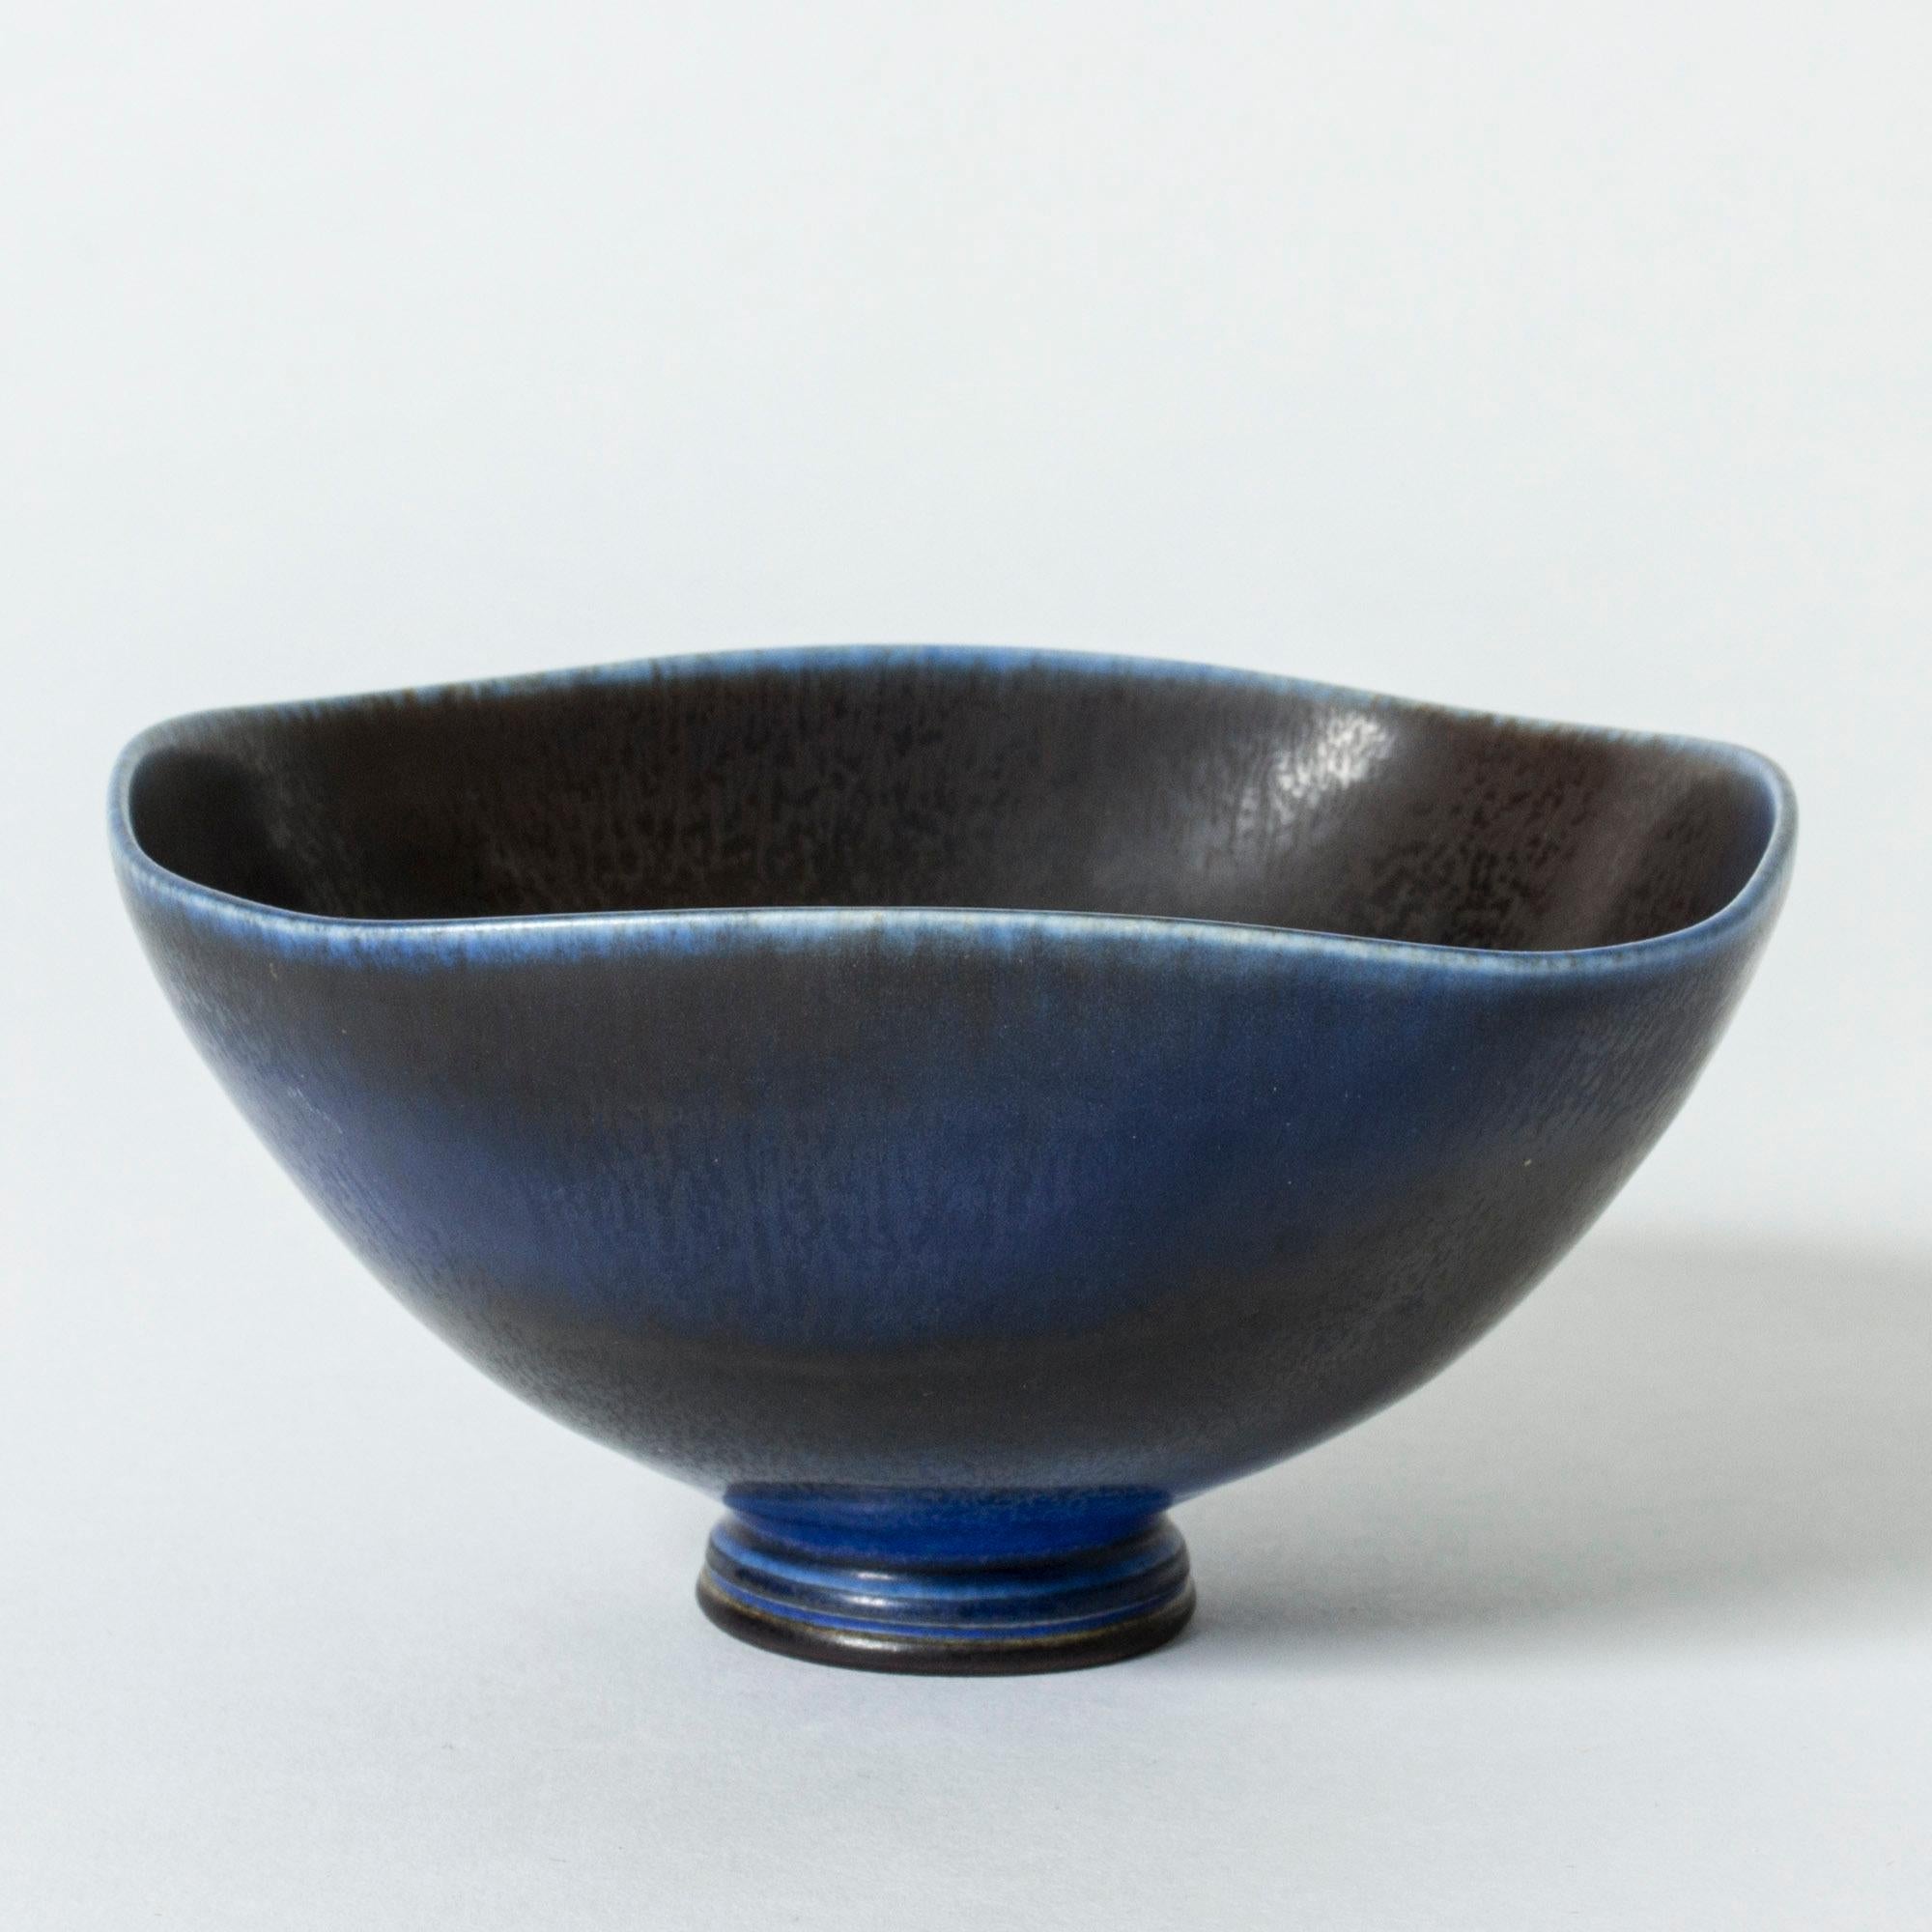 Beautiful stoneware bowl by Berndt Friberg. Slightly square form with rounded corners, undulating edge. Elegant blue hare’s fur glaze.

Berndt Friberg was a Swedish ceramicist, renowned for his stoneware vases and vessels for Gustavsberg. His